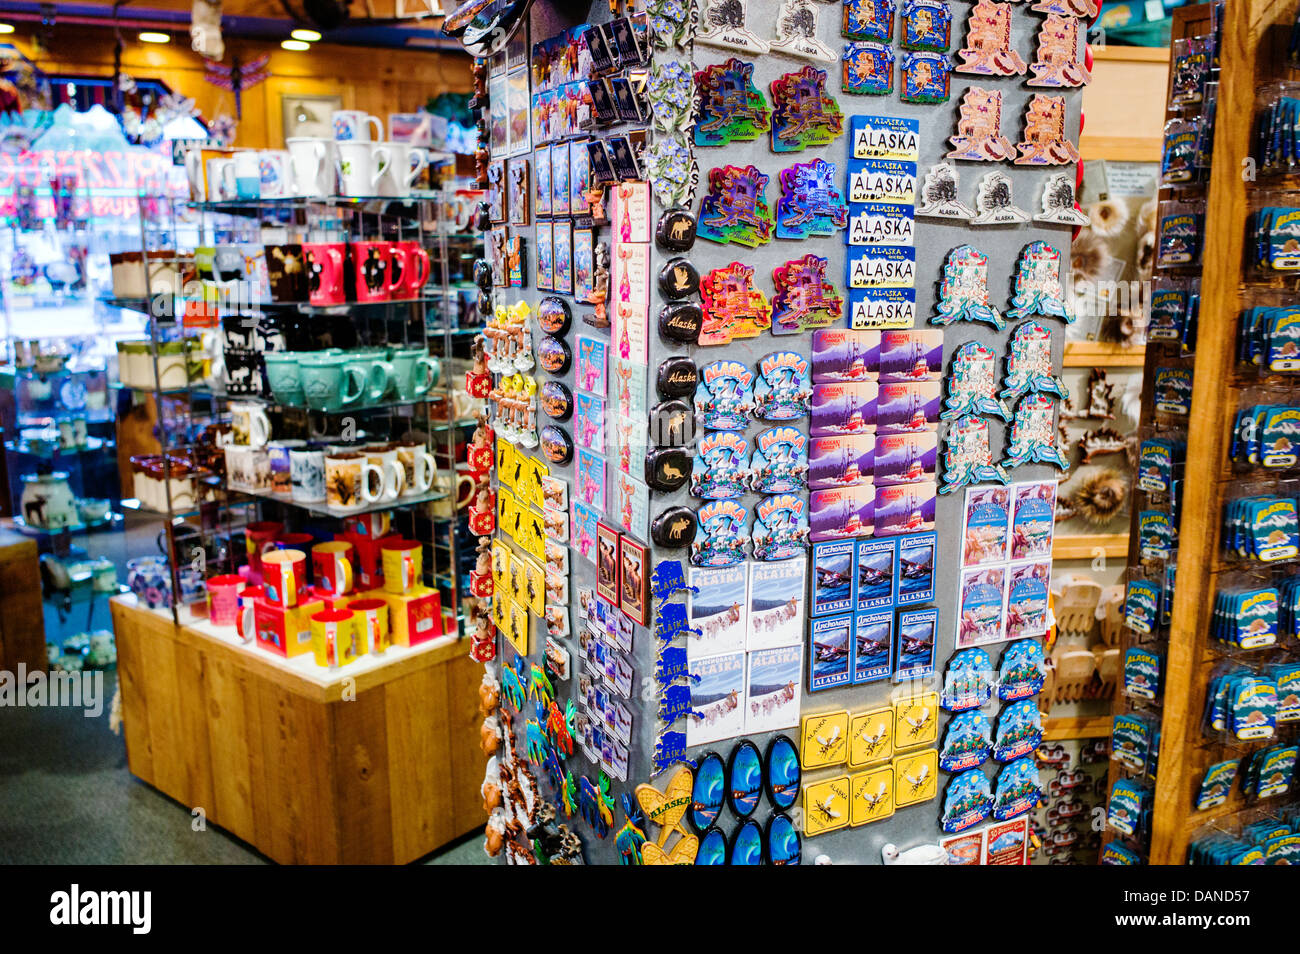 Trinkets, gifts and souvenirs for sale, retail store, Anchorage, Alaska, USA Stock Photo